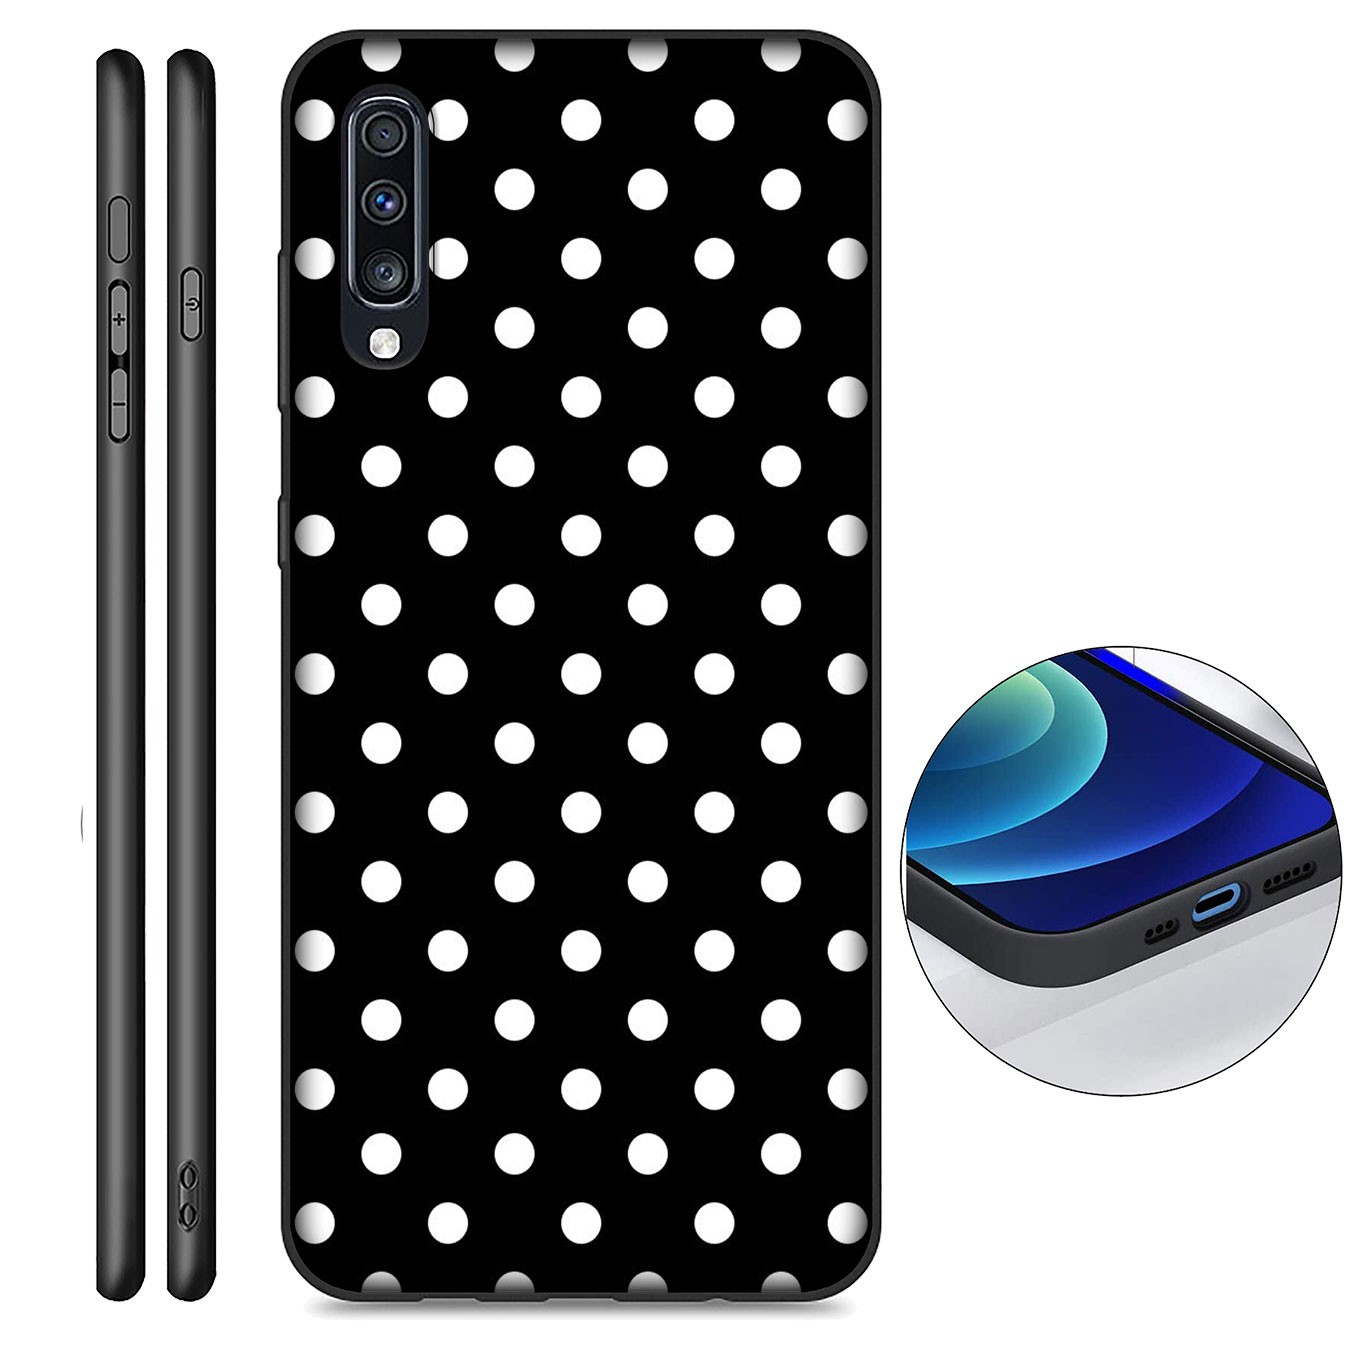 Samsung Galaxy S21 Ultra S8 Plus F62 M62 A2 A32 A52 A72 S21+ S8+ S21Plus Casing Soft Silicone Phone Case black and white Round Dots Cover